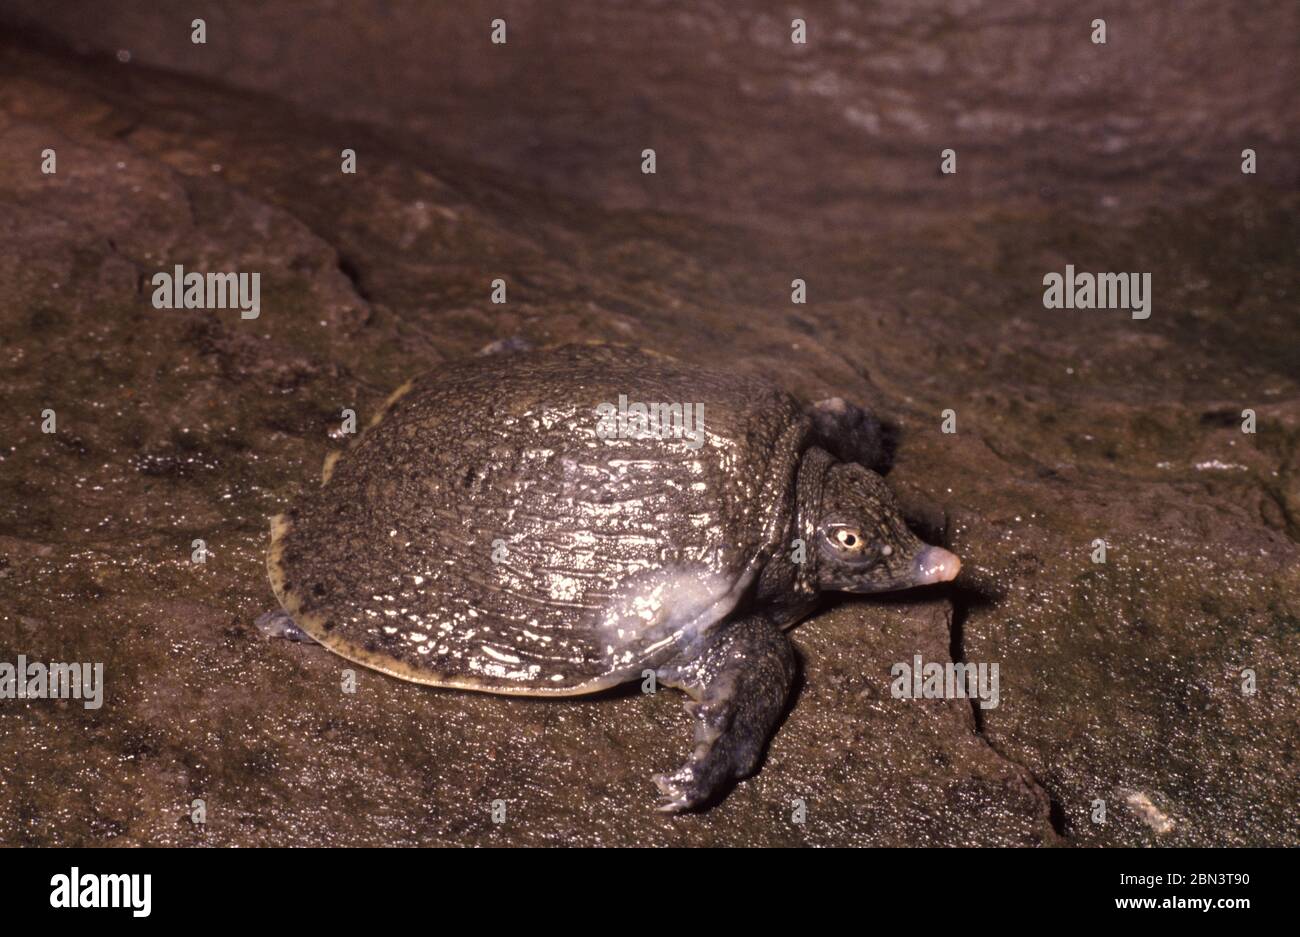 Turtle disease: mycosis in juvenile Chinese soft shelled turtle (Pelodiscus sinensis) Stock Photo